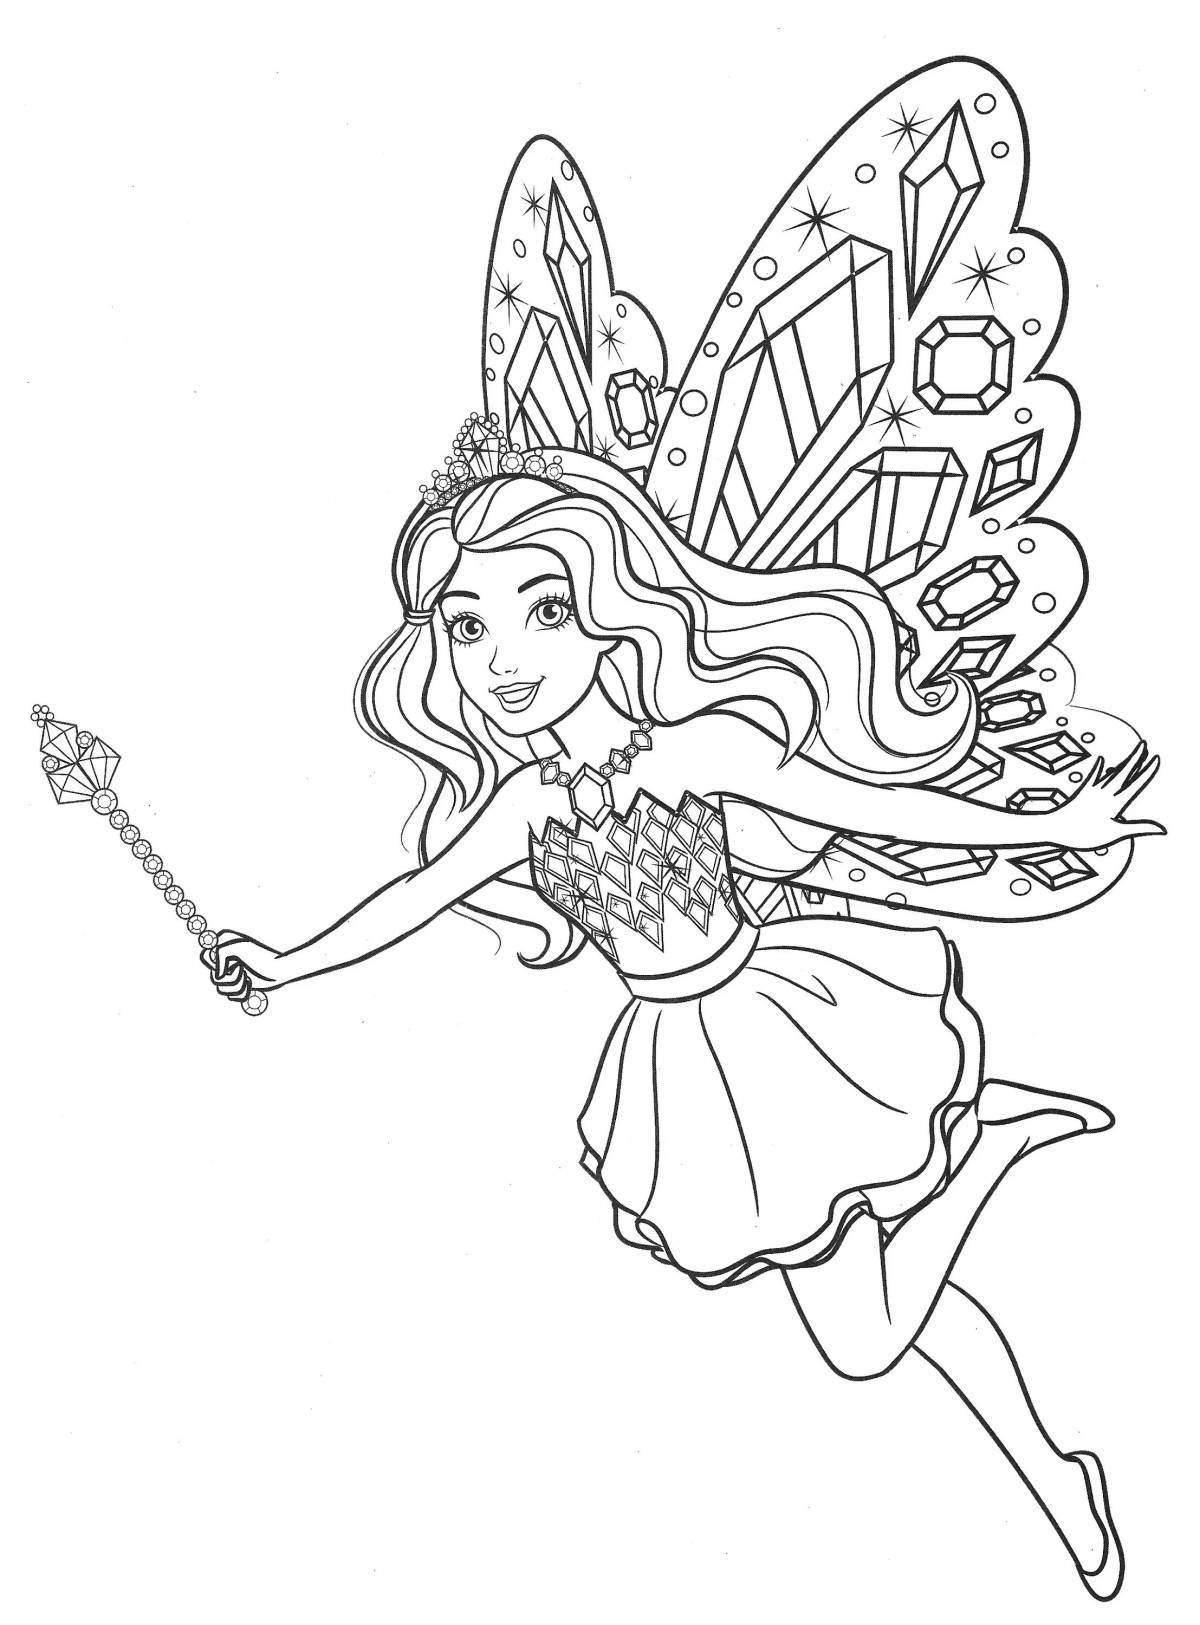 Princess Butterfly Rainbow Coloring Page